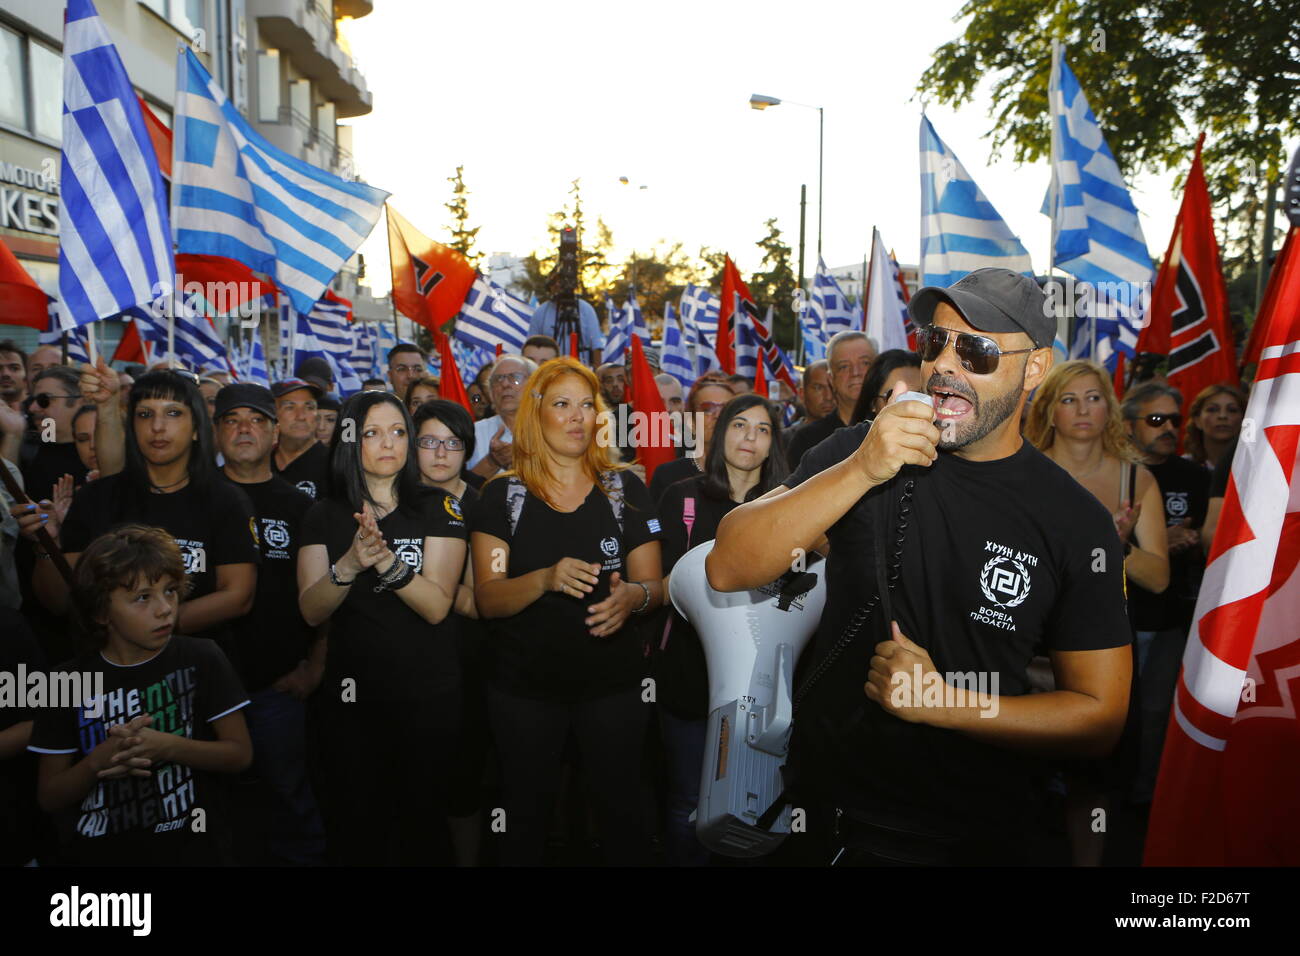 Athens, Greece. 16th Sep, 2015. A man shouts slogans to the crowd through a megaphone at the Golden Dawn election rally. Greek right wing party Golden Dawn held an election rally in Athens, four days ahead of election day. The party hopes to gain enough seats in the election to become the third latest party in the Greek Parliament. Credit:  Michael Debets/Pacific Press/Alamy Live News Stock Photo